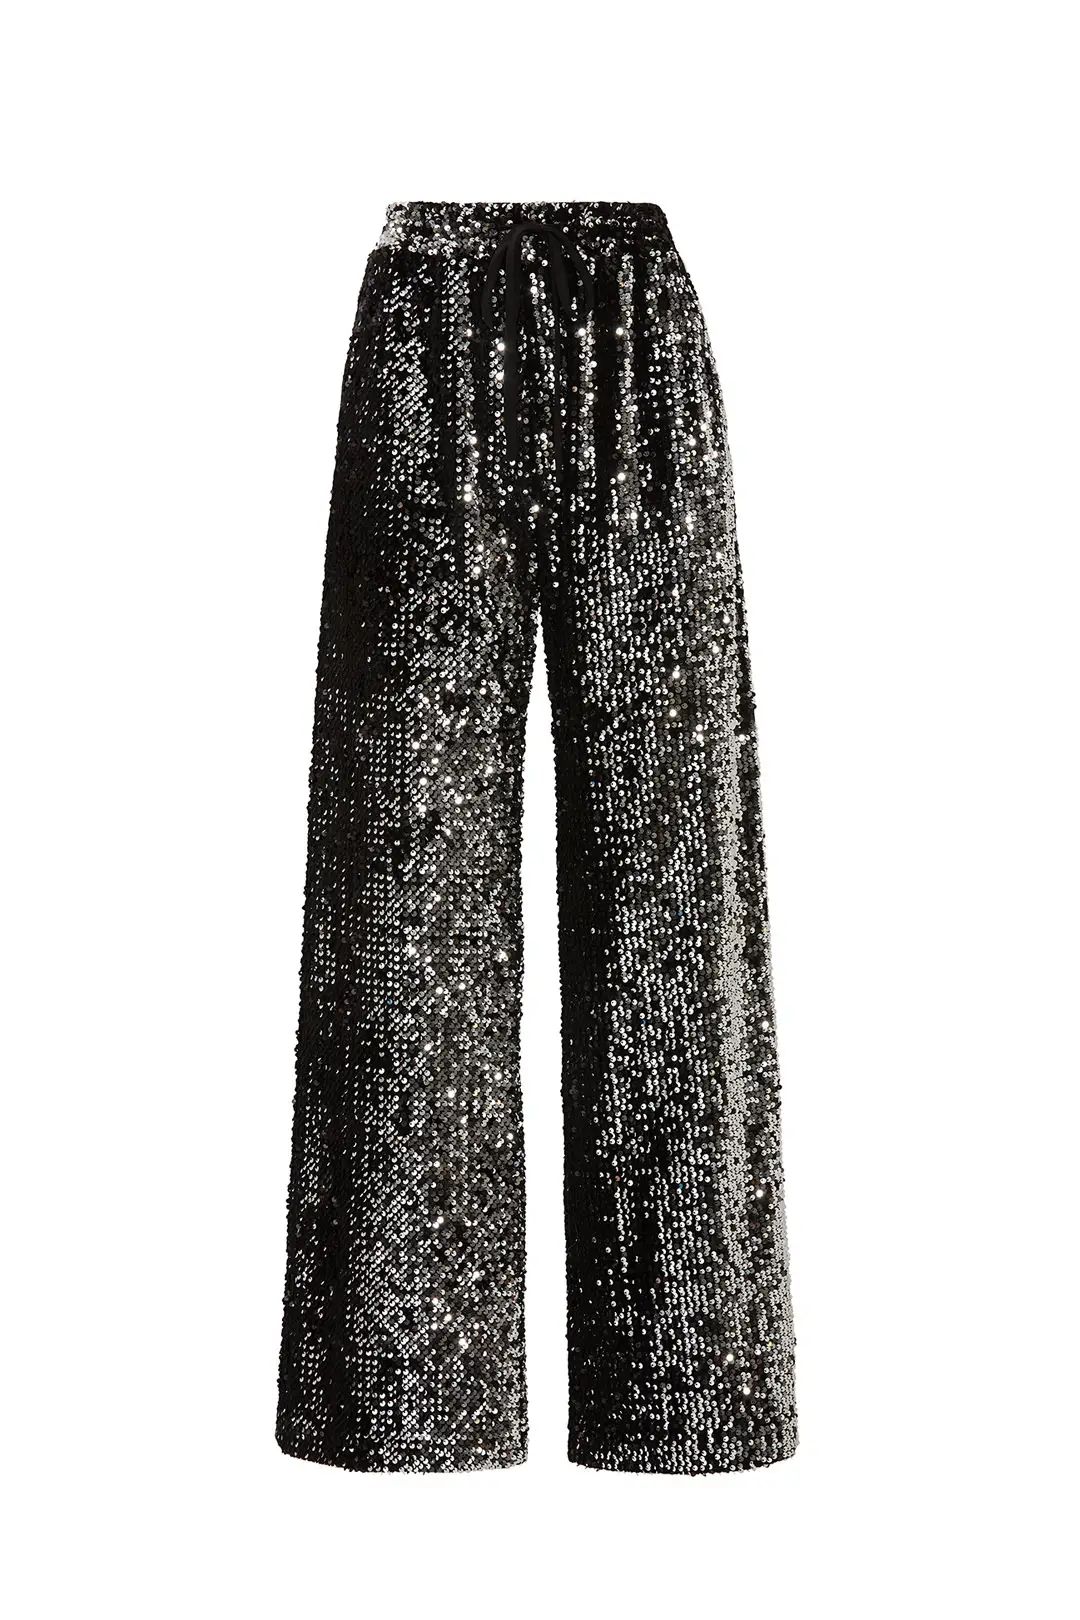 Milly Sequin Track Pants | Rent The Runway